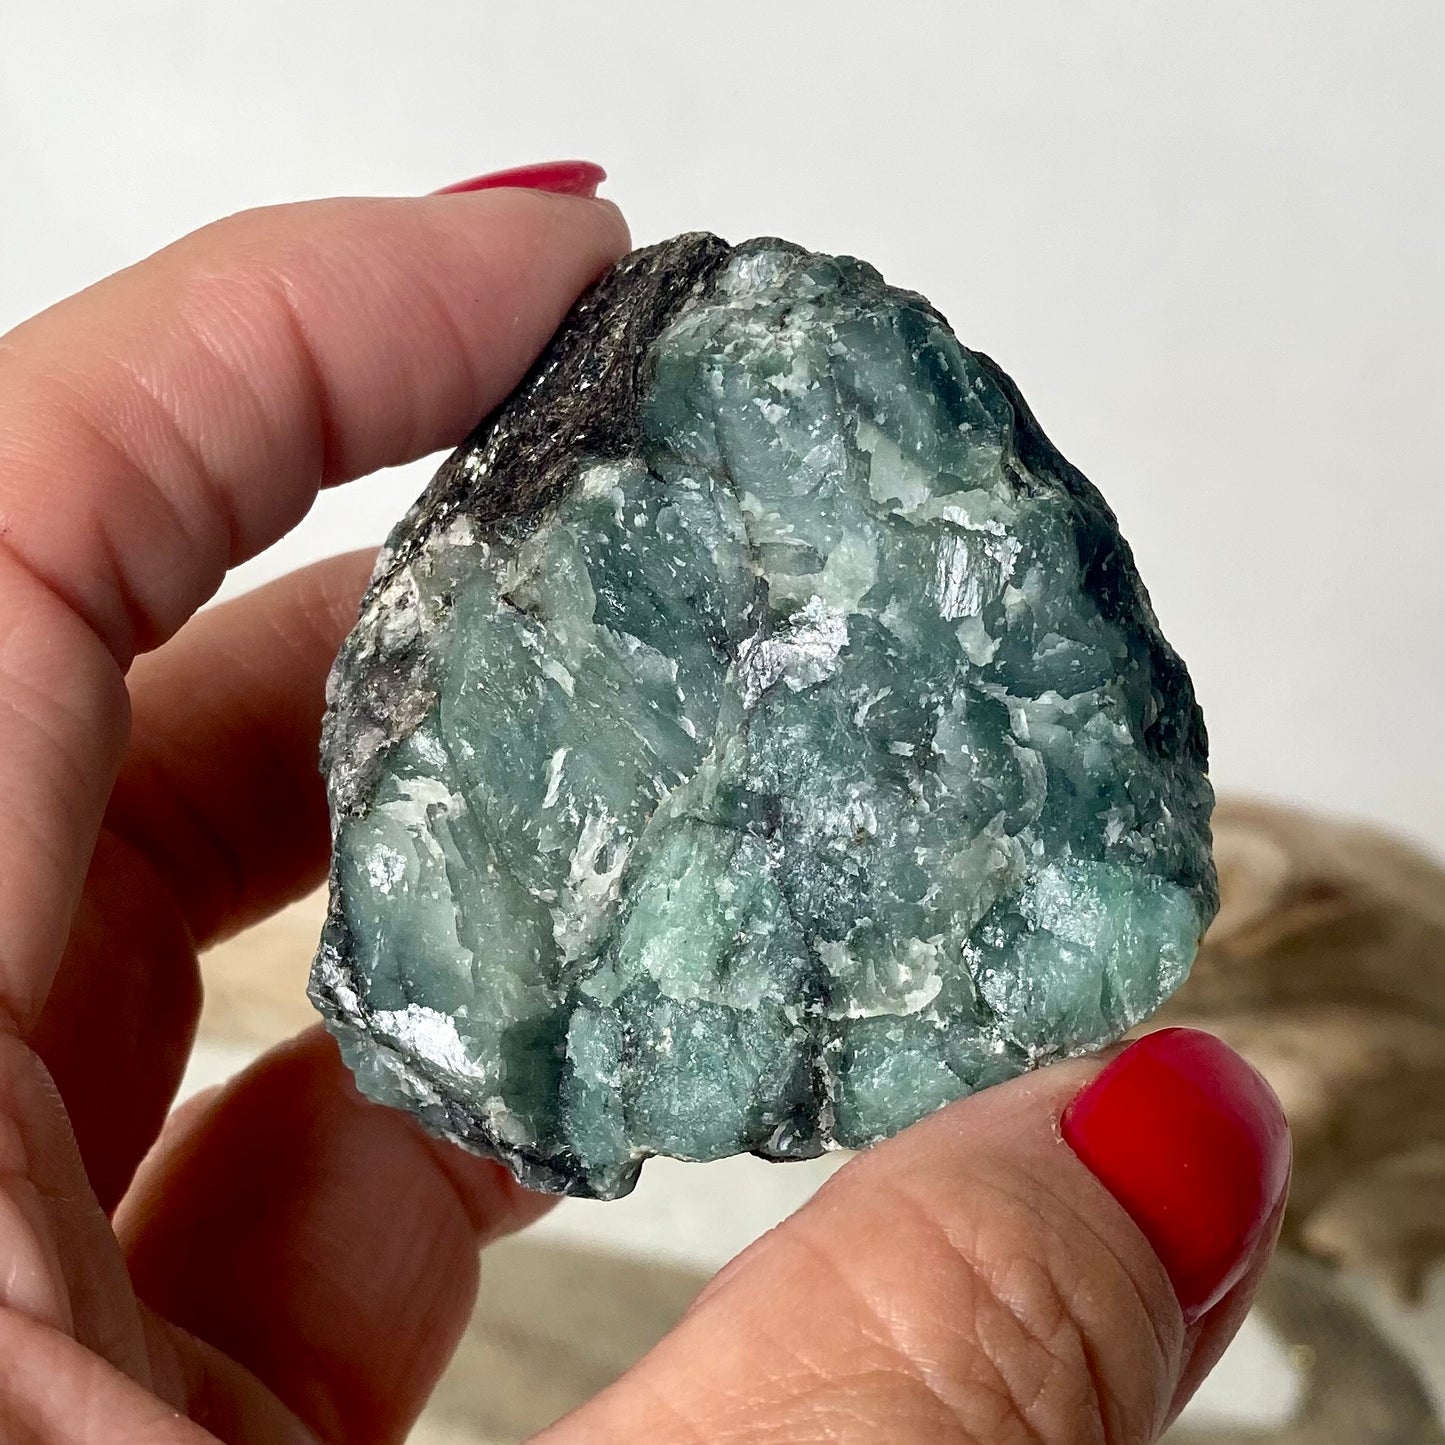 Natural Emerald Raw Chunks - Healing Energy from Earth's Heart